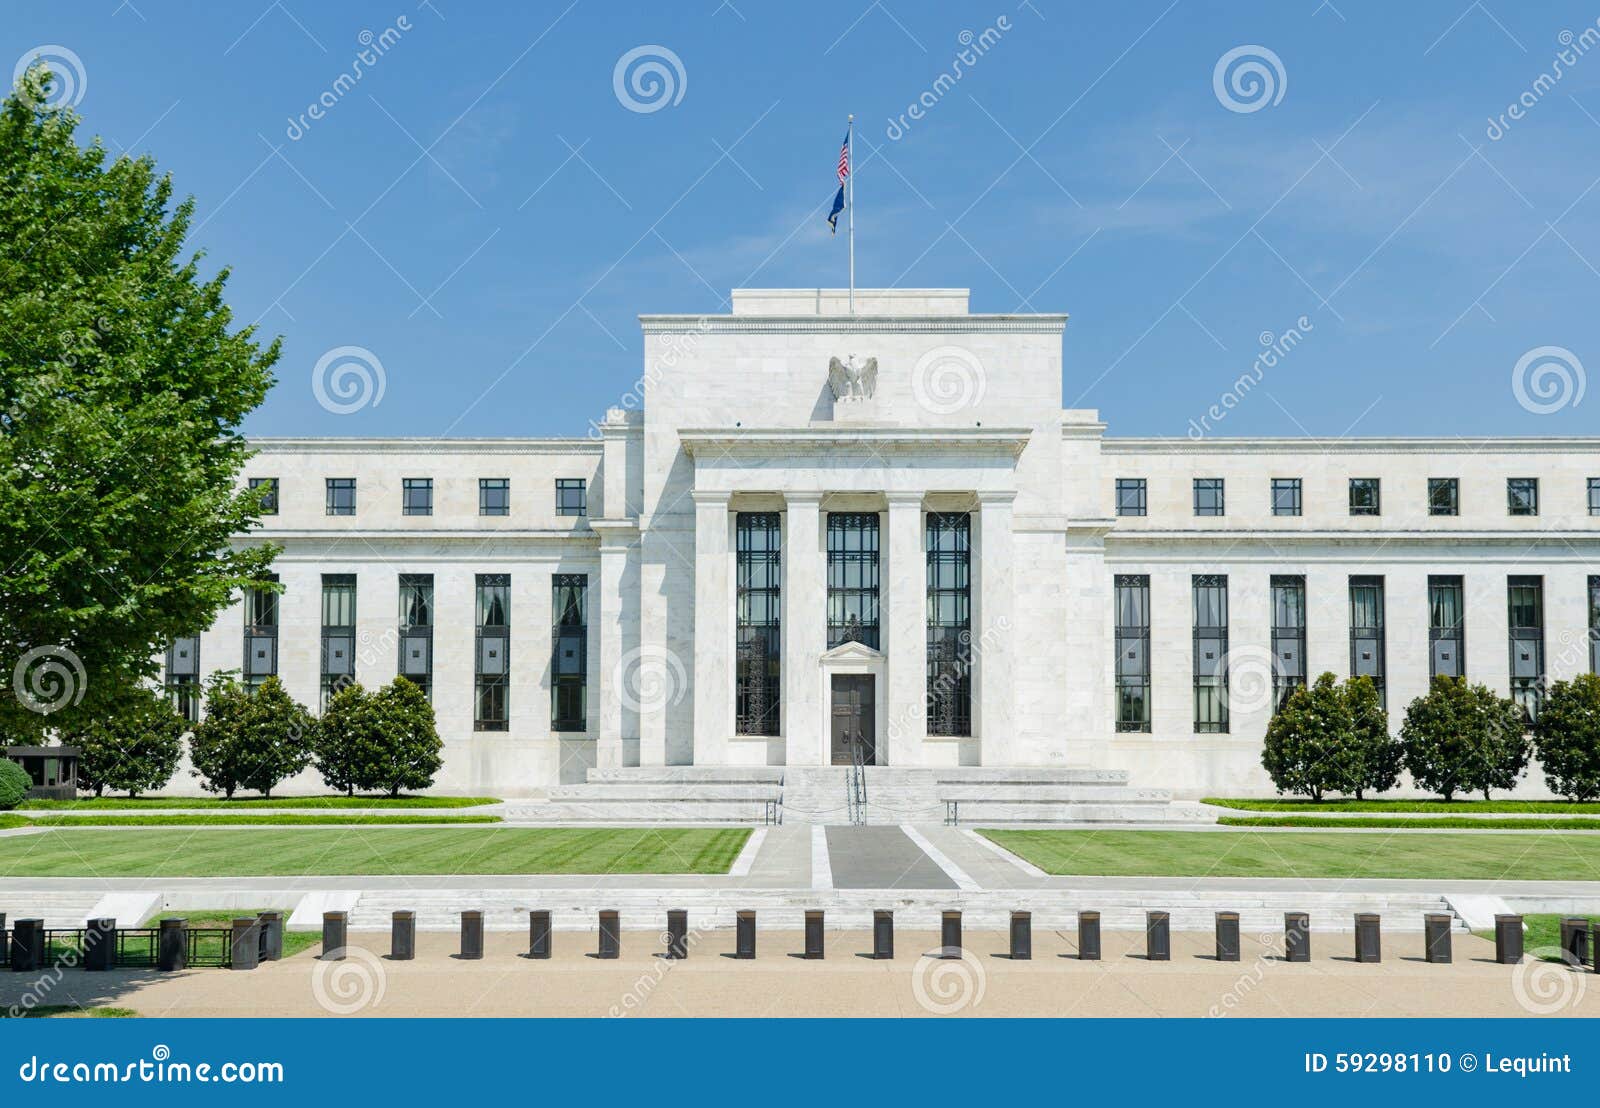 united states of america usa federal reserve building